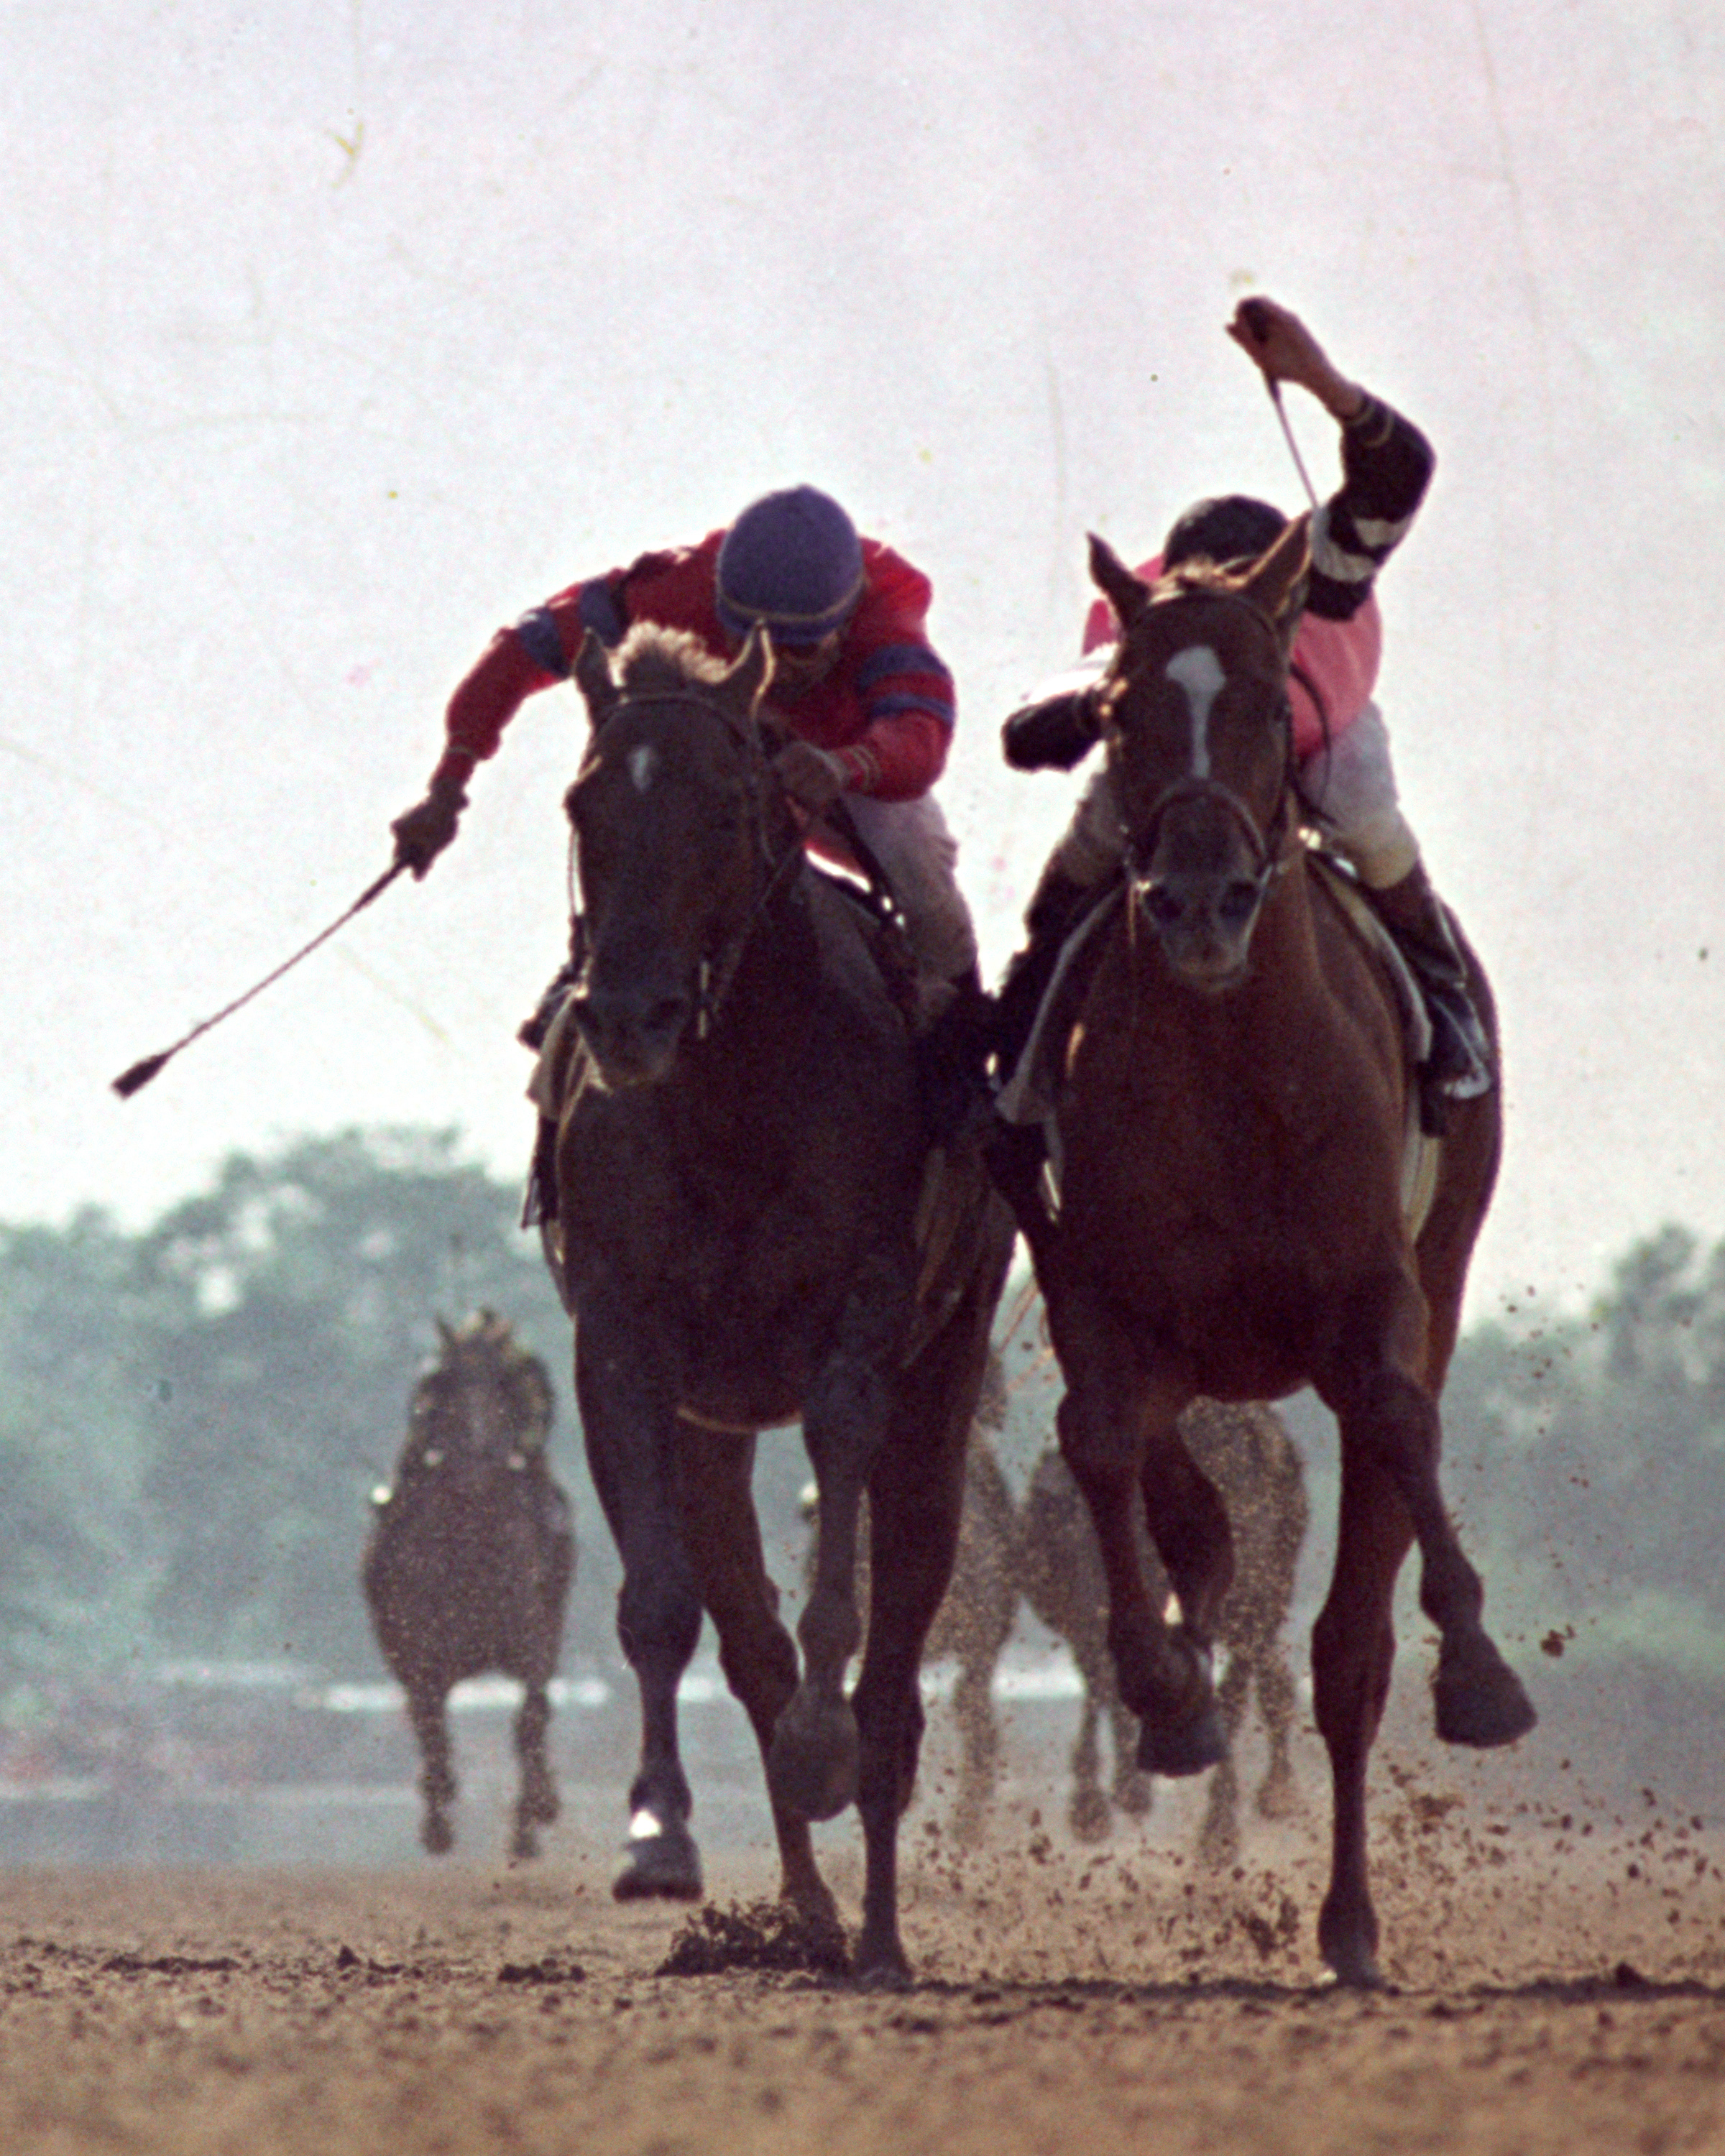 Affirmed (Steve Cauthen up) dueling Alydar (Jorge Velasquez up) for the win in the 1978 Belmont Stakes, becoming the 11th Triple Crown winner in history (NYRA/Bob Coglianese /Museum Collection)